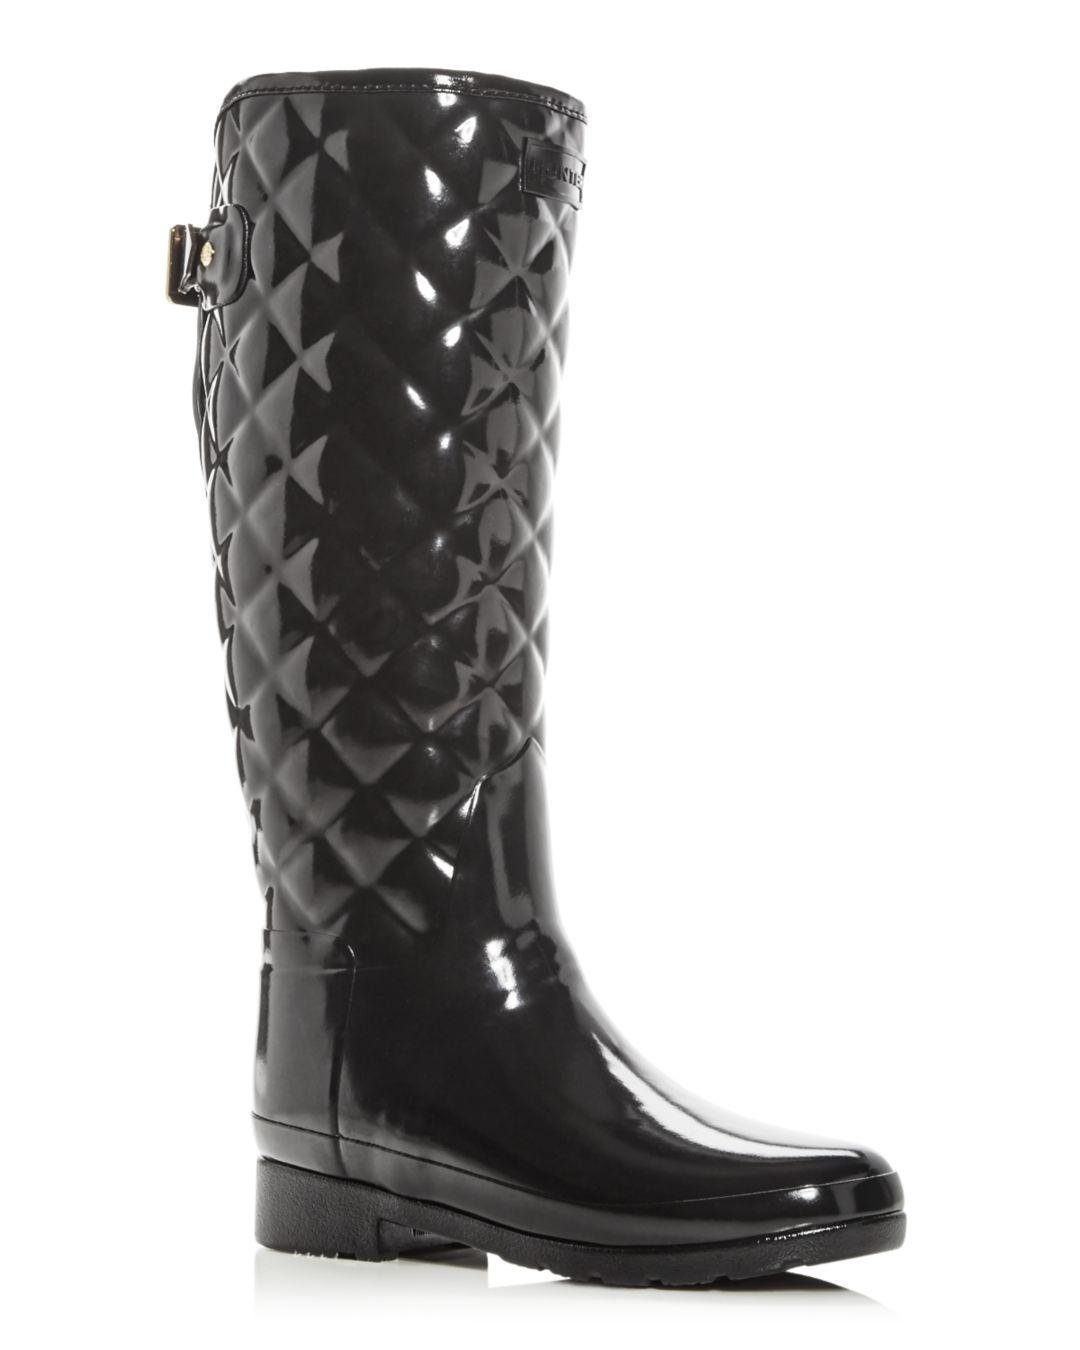 Lyst - HUNTER Women's Refined Gloss Quilted Rain Boots in Black